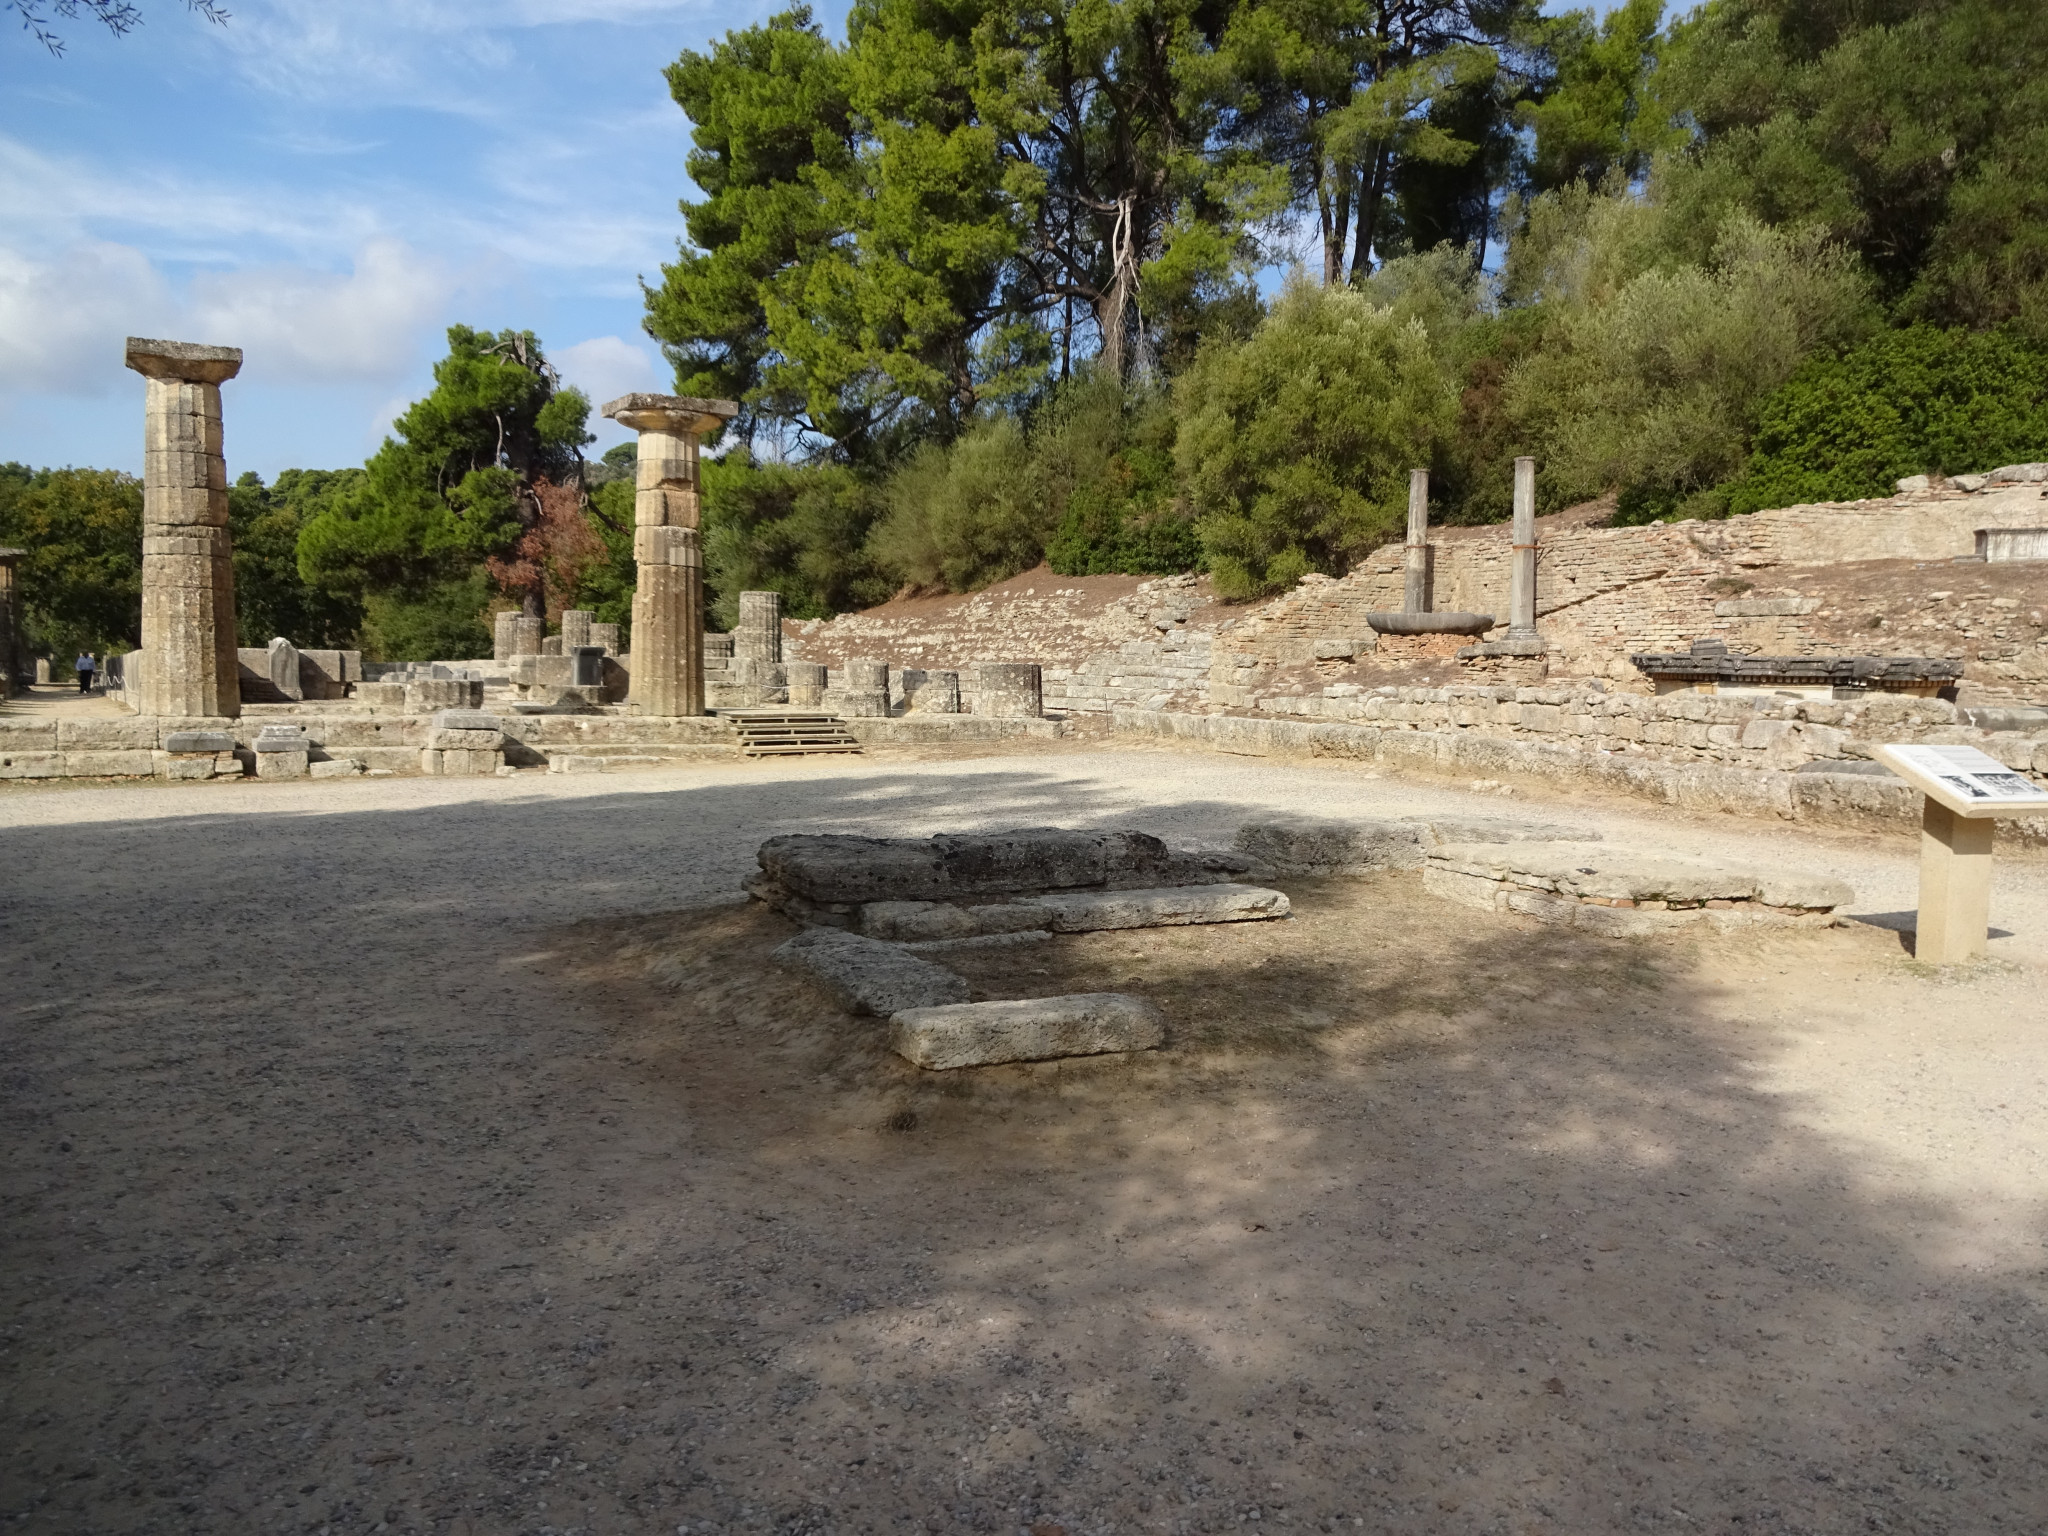 The ruins in Ancient Olympia where the Olympics of antiquity were held©ITG